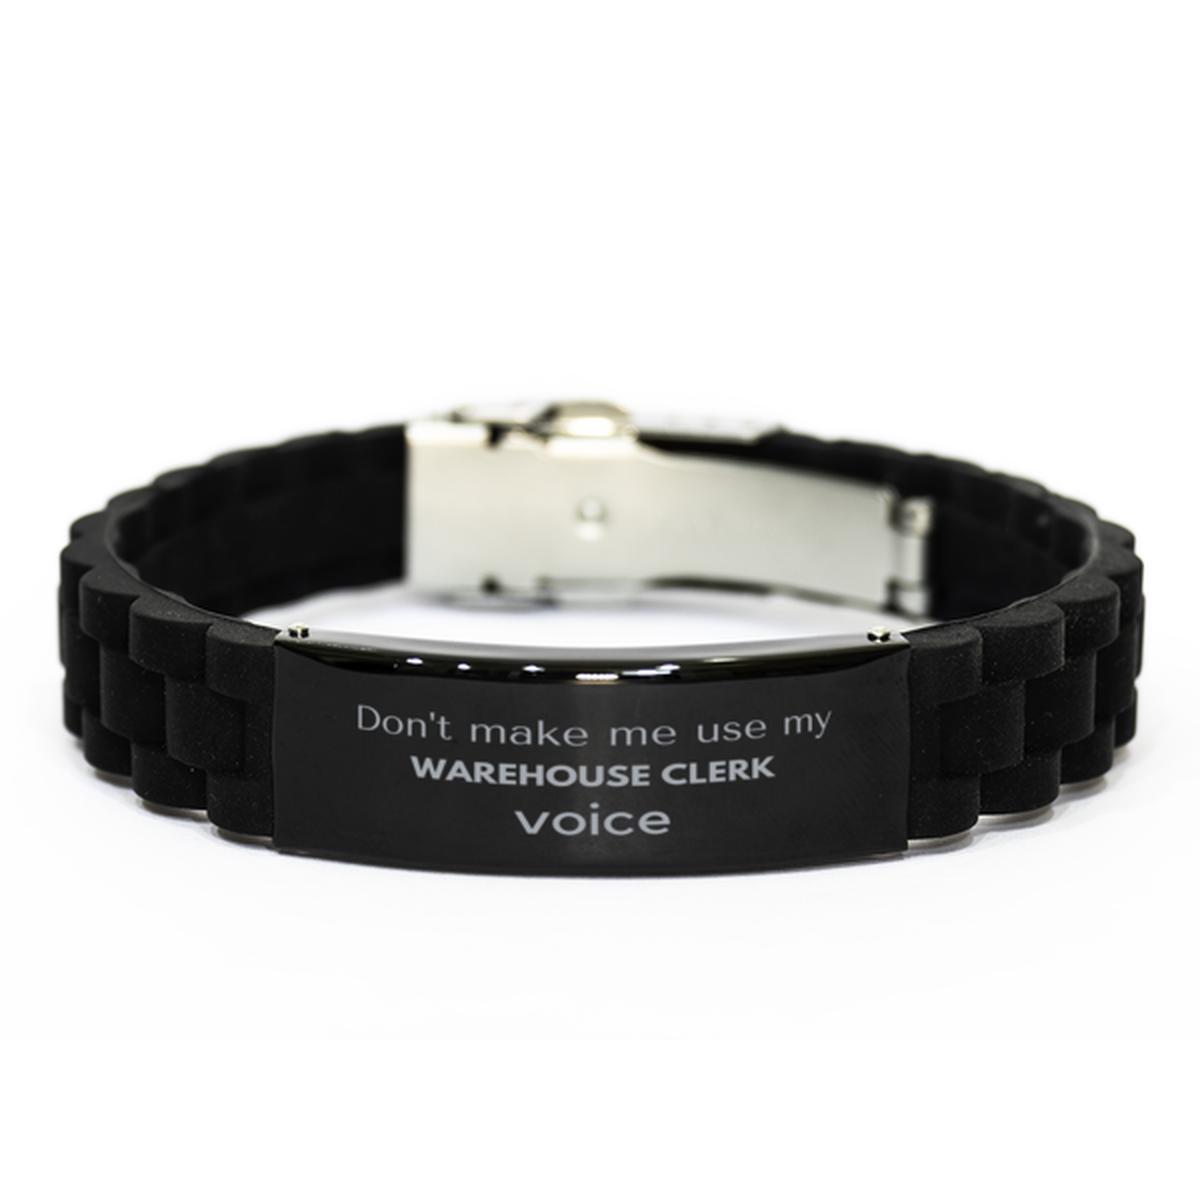 Don't make me use my Warehouse Clerk voice, Sarcasm Warehouse Clerk Gifts, Christmas Warehouse Clerk Black Glidelock Clasp Bracelet Birthday Unique Gifts For Warehouse Clerk Coworkers, Men, Women, Colleague, Friends